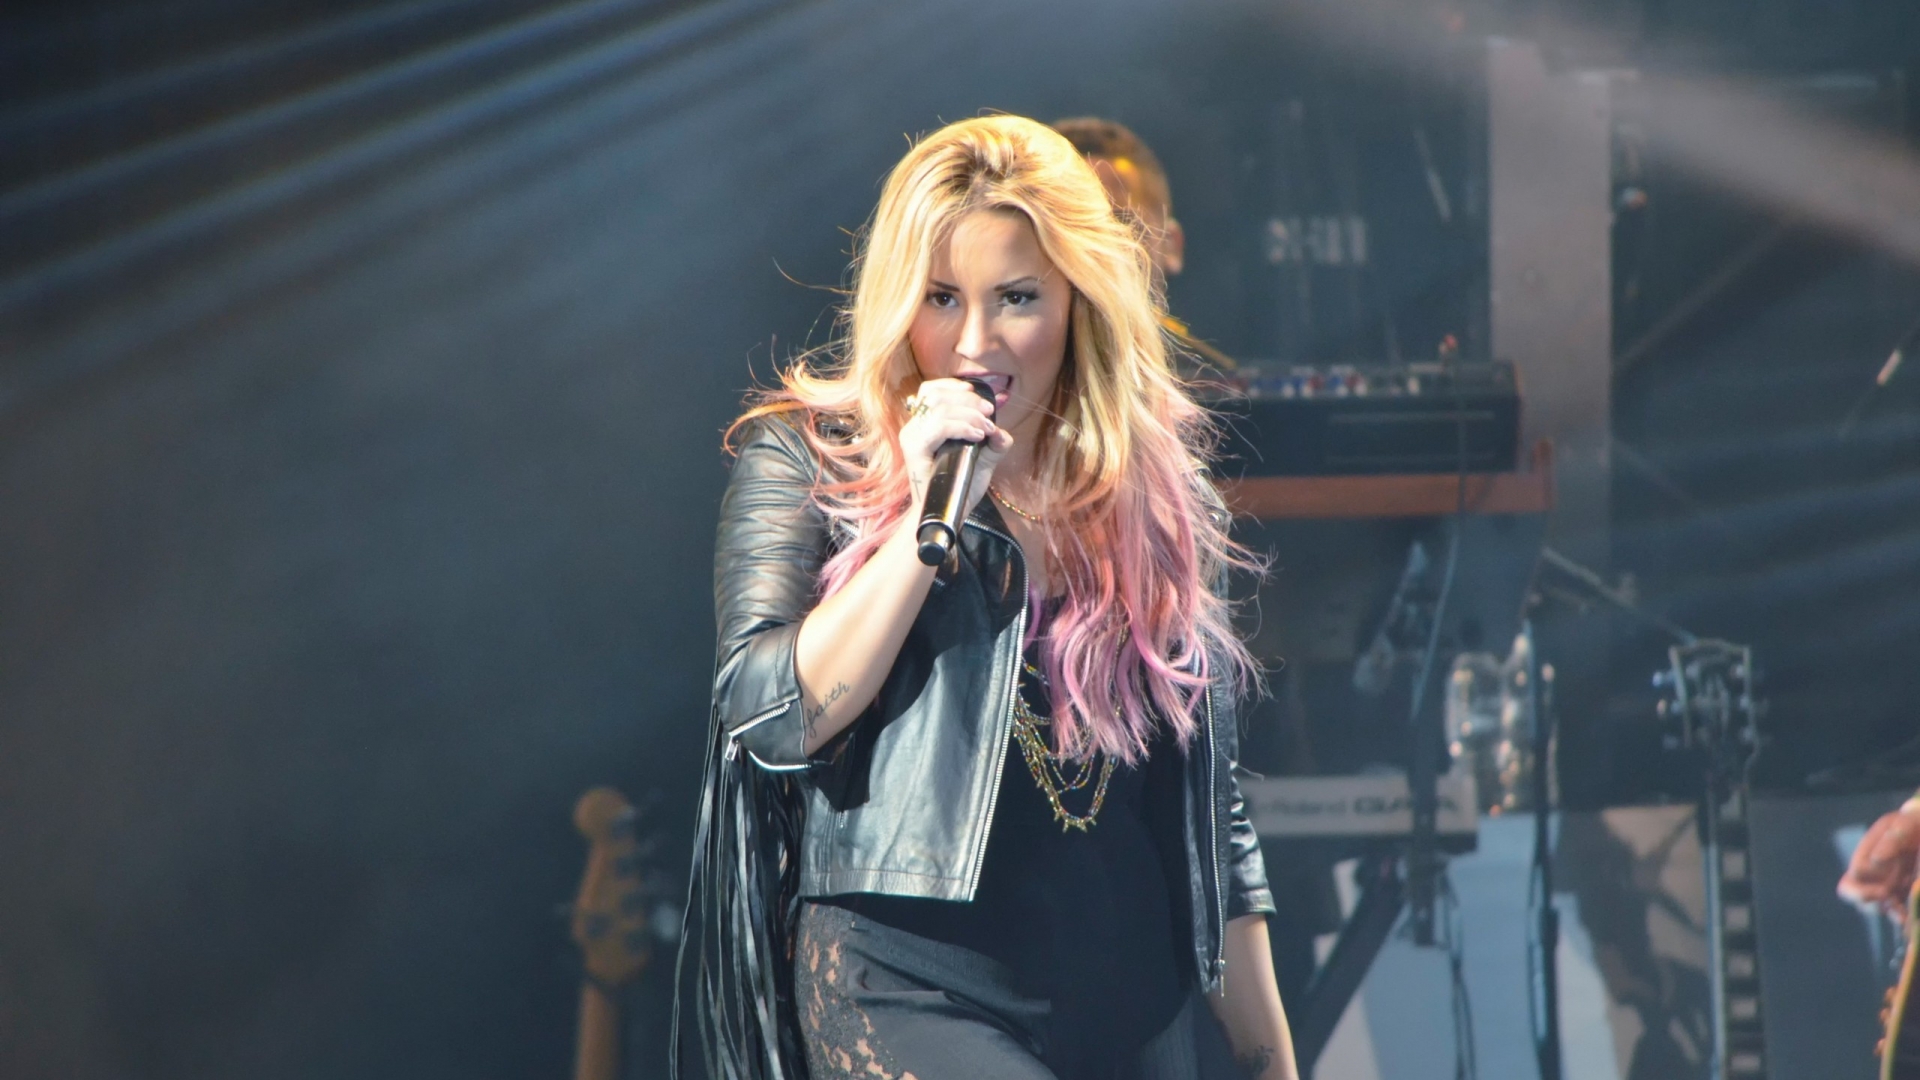 Demi Lovato Performing  for 1920 x 1080 HDTV 1080p resolution